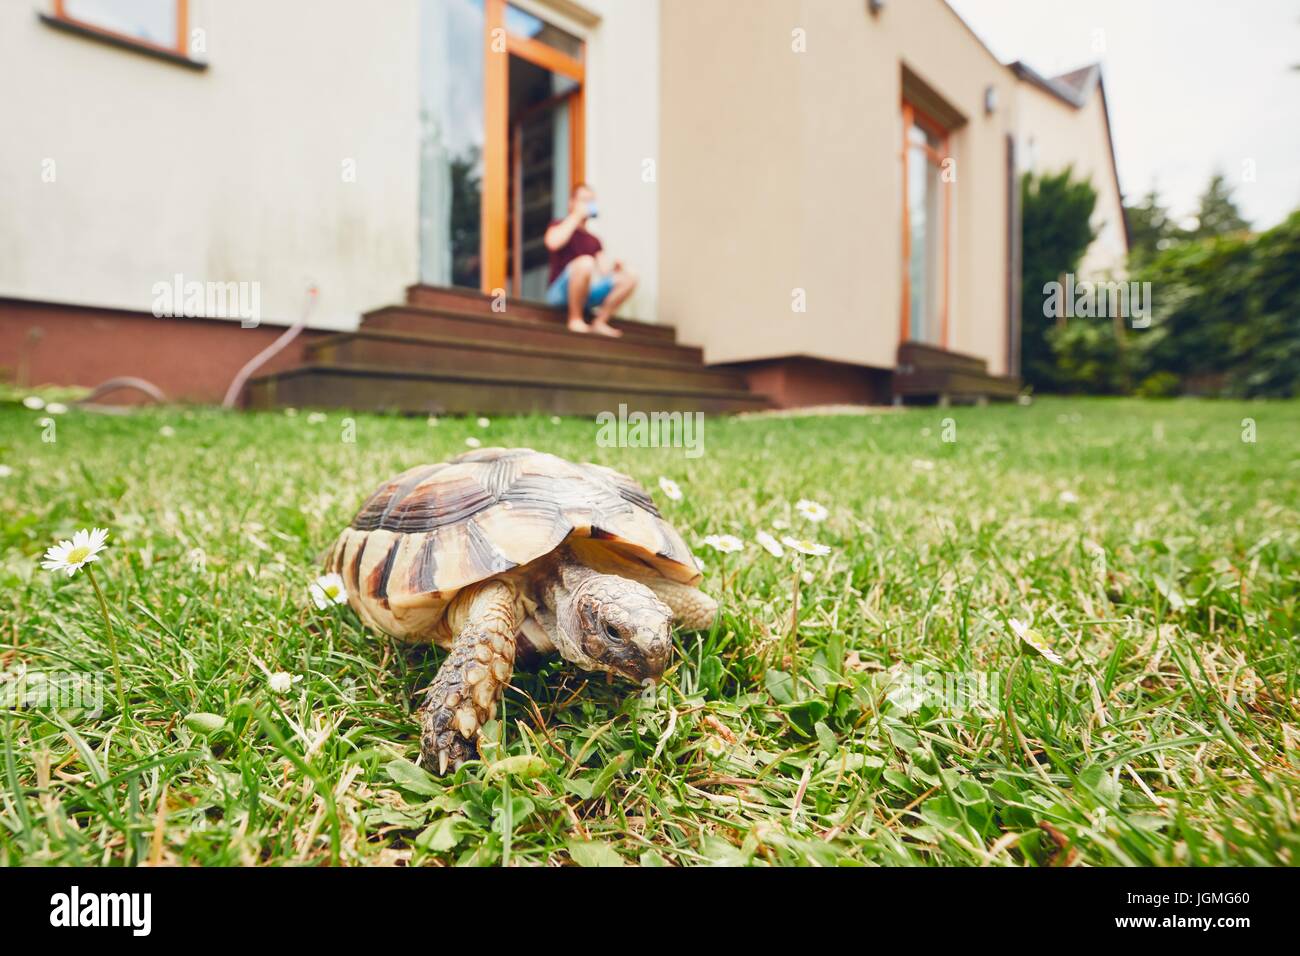 Life with domestic animals. Man resting and his turtle walking in grass on the garden. Stock Photo